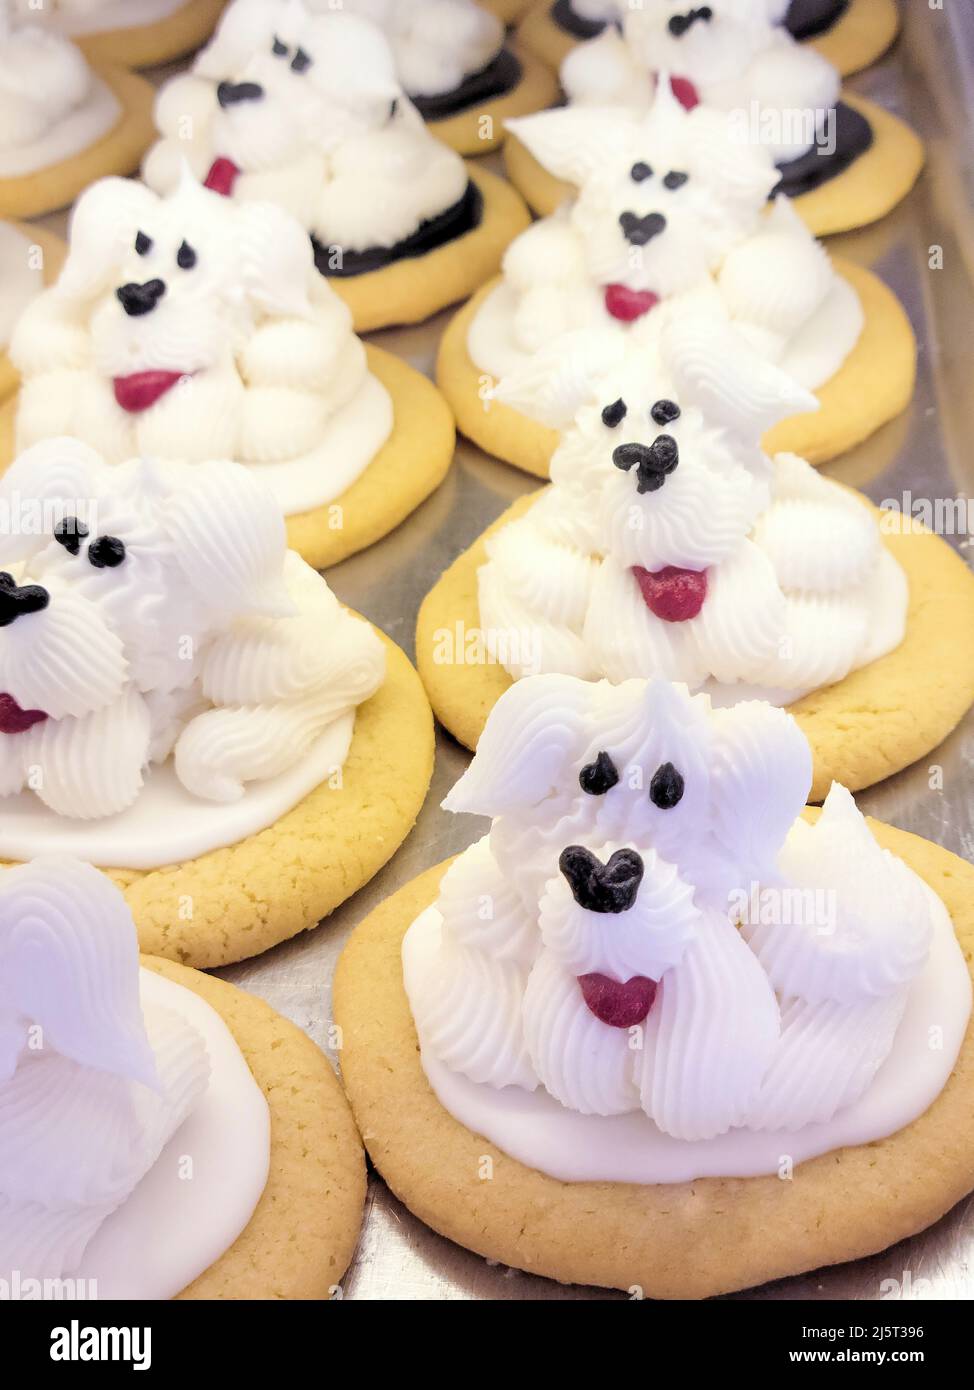 Cute puppy cookies with white frosting on a bakery shelf Stock Photo